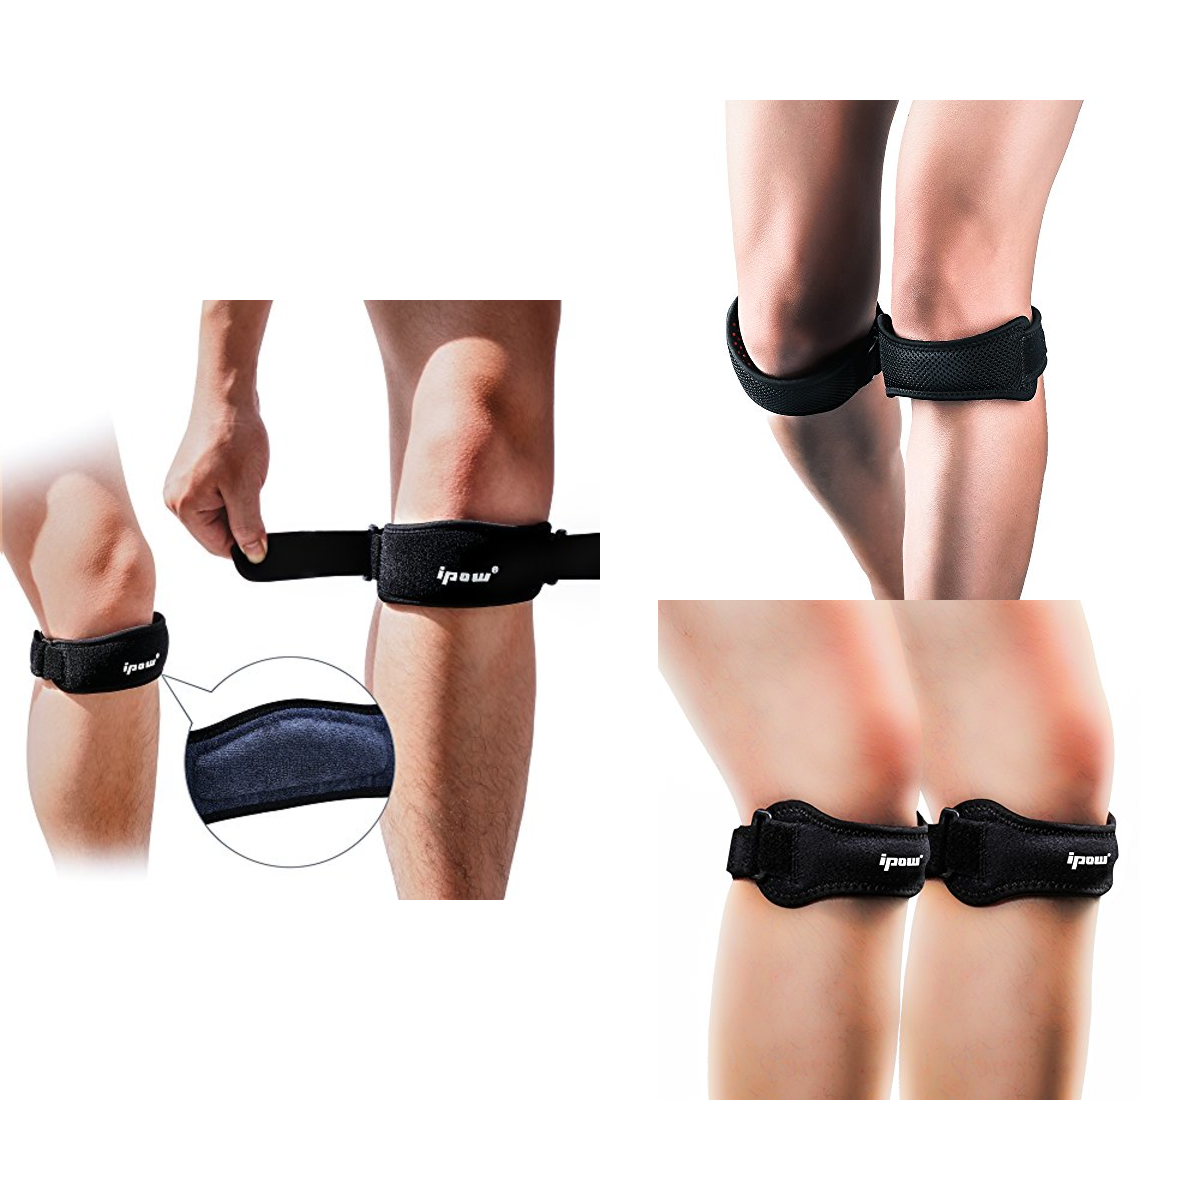 2 Pack Knee Pain Relief and Stabilizer Knee Strap Brace Support for sport pain - Everyday Crosstrain